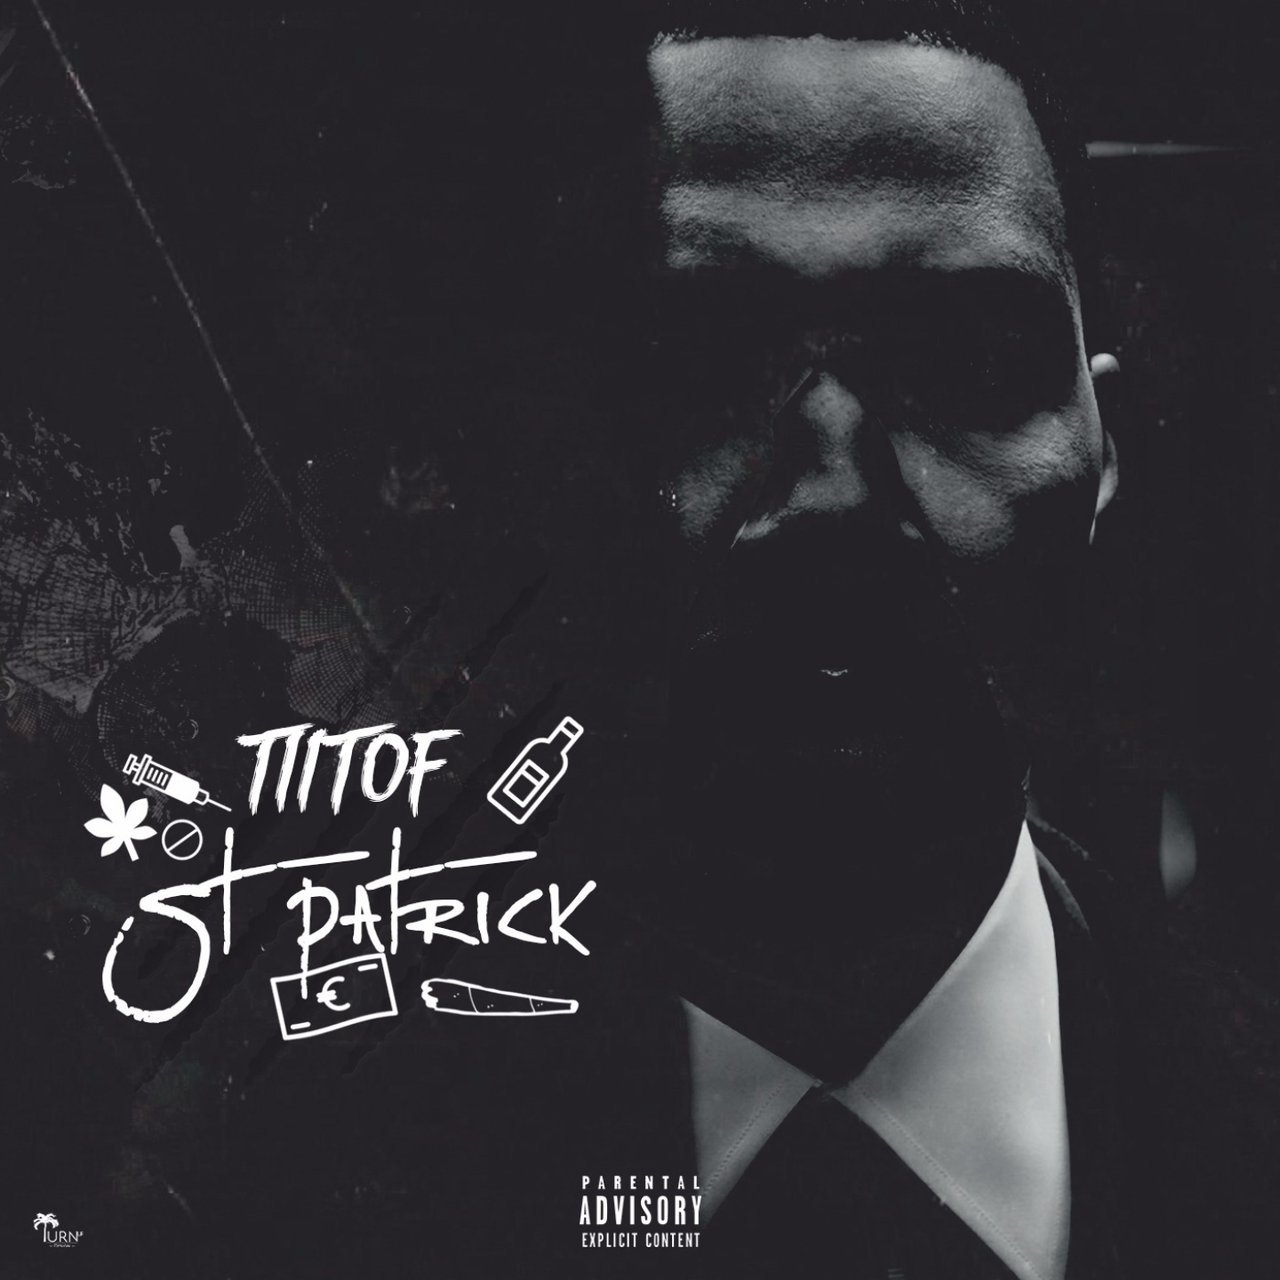 Tiitof - St. Patrick (Cover)